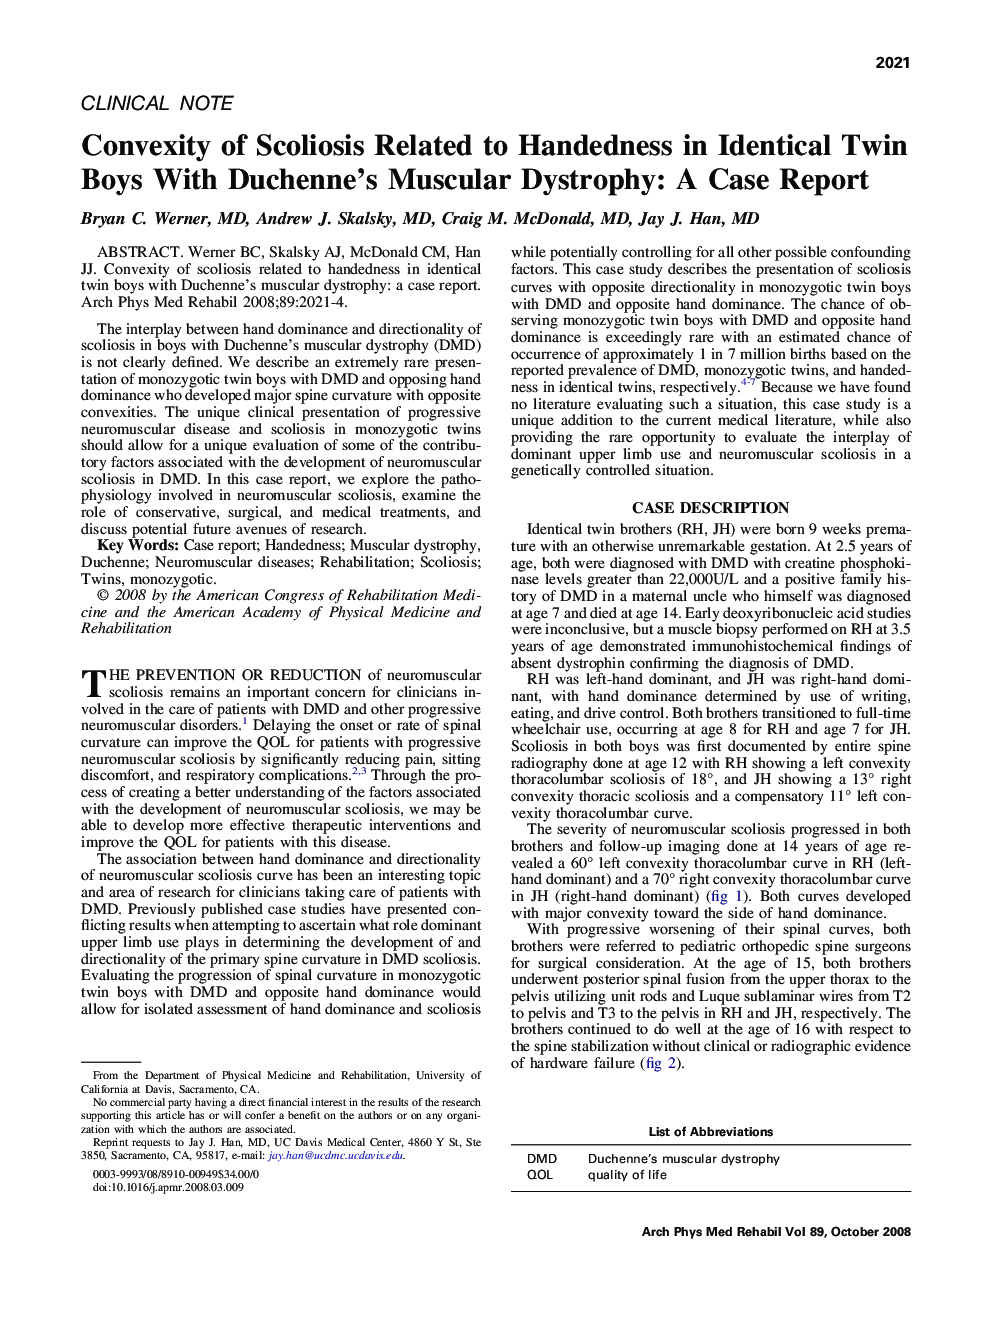 Convexity of Scoliosis Related to Handedness in Identical Twin Boys With Duchenne's Muscular Dystrophy: A Case Report